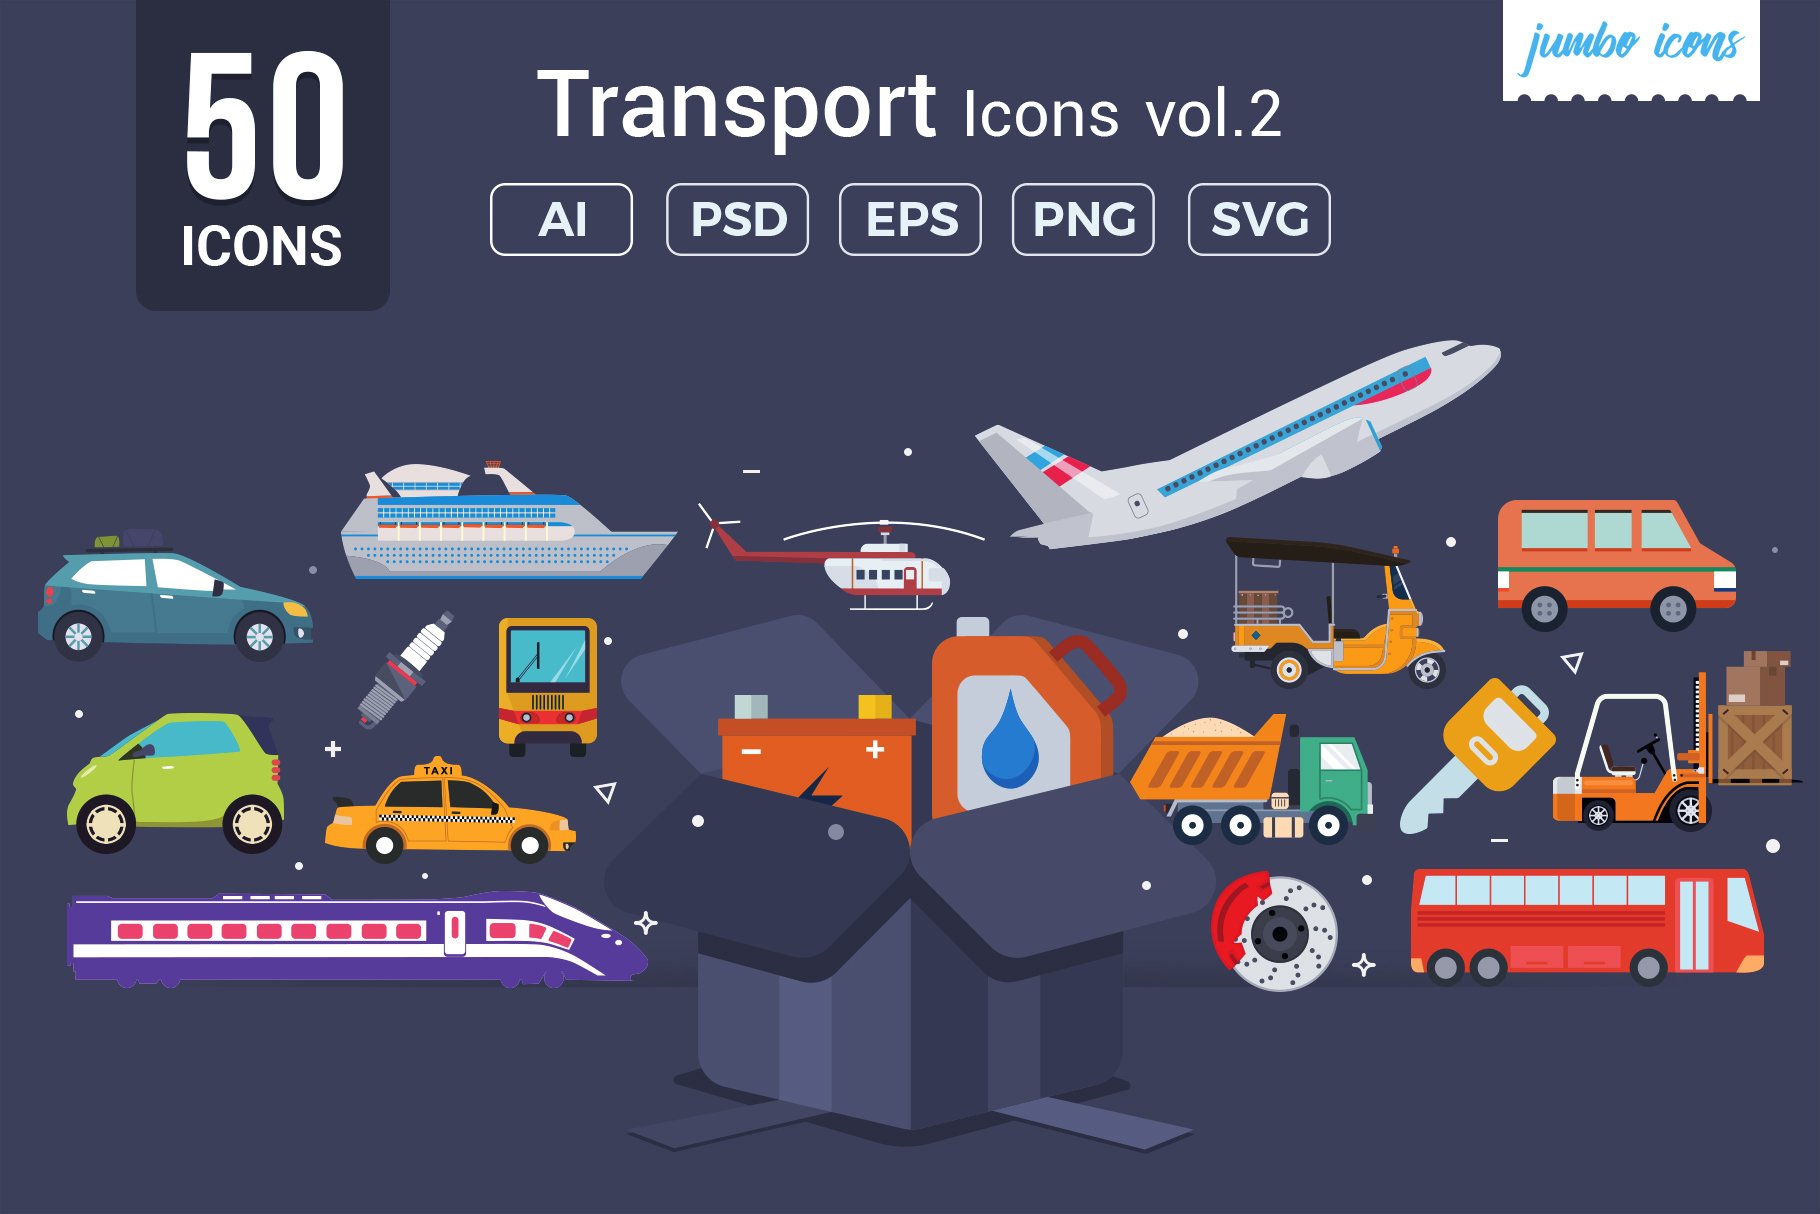 Flat Vector Icons Transport Pack V2 cover image.